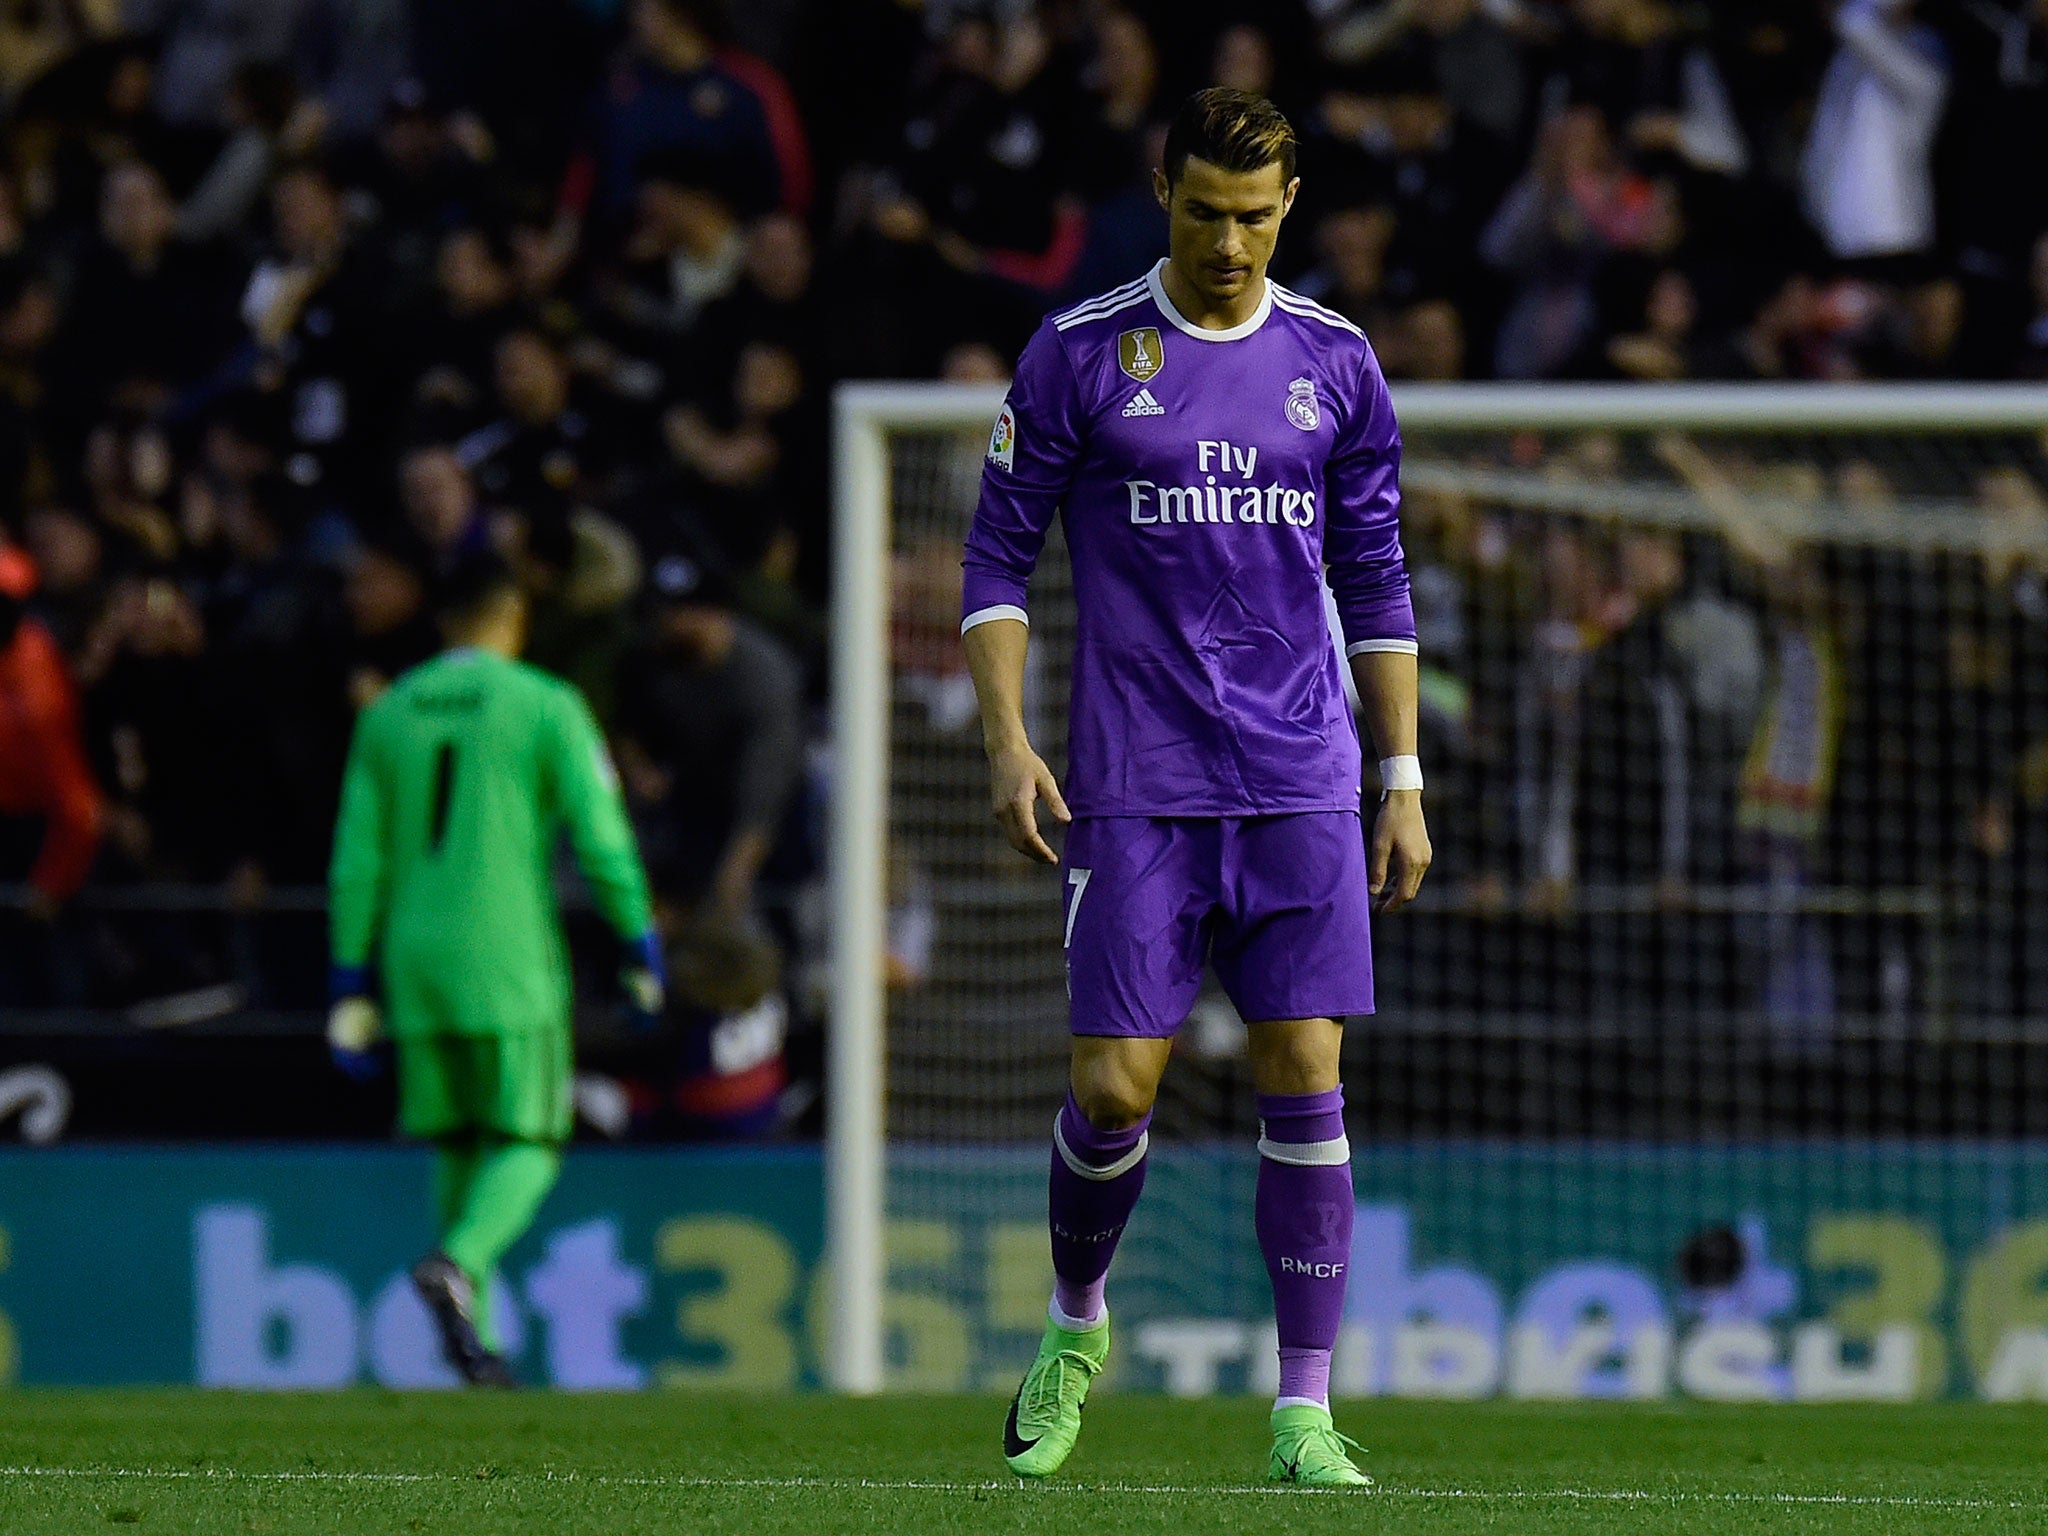 Real Madrid passed on the opportunity to move four points clear of rivals Barcelona